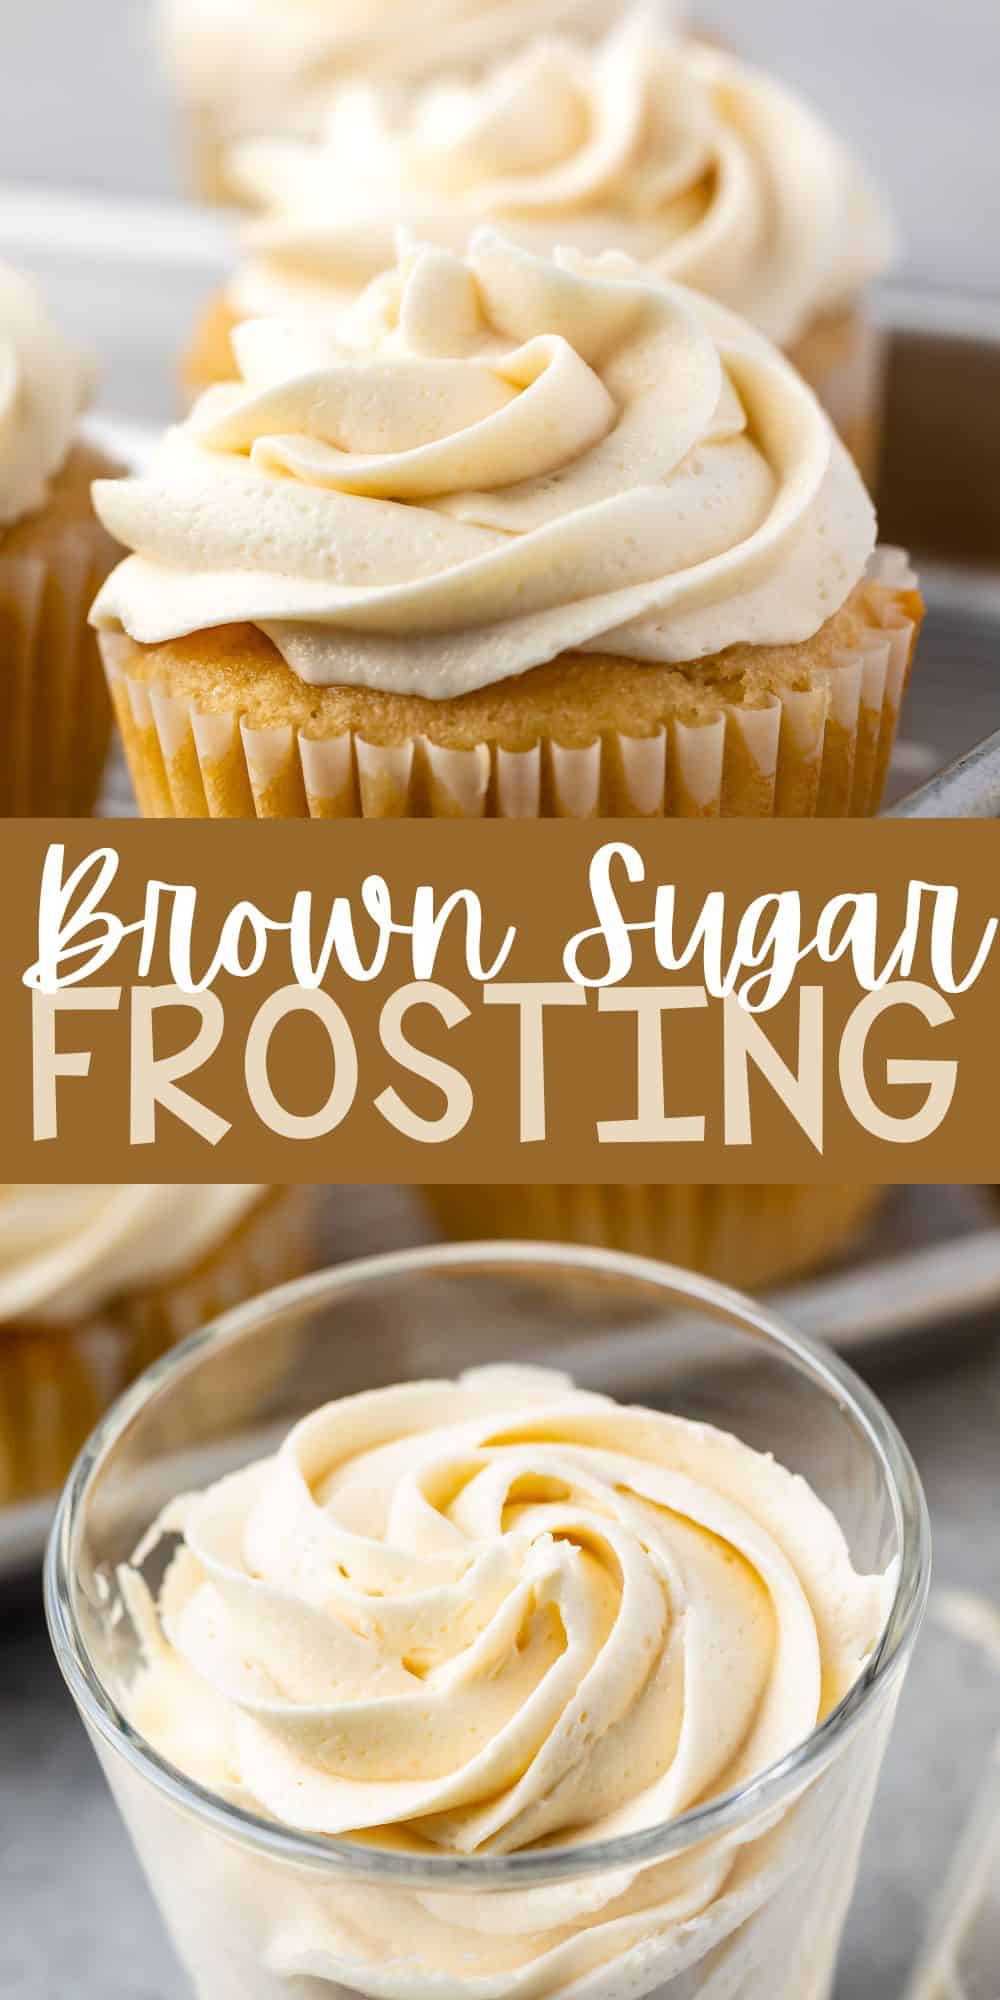 two photos of cream colored frosting swirled on top of a cupcake with words on the image.